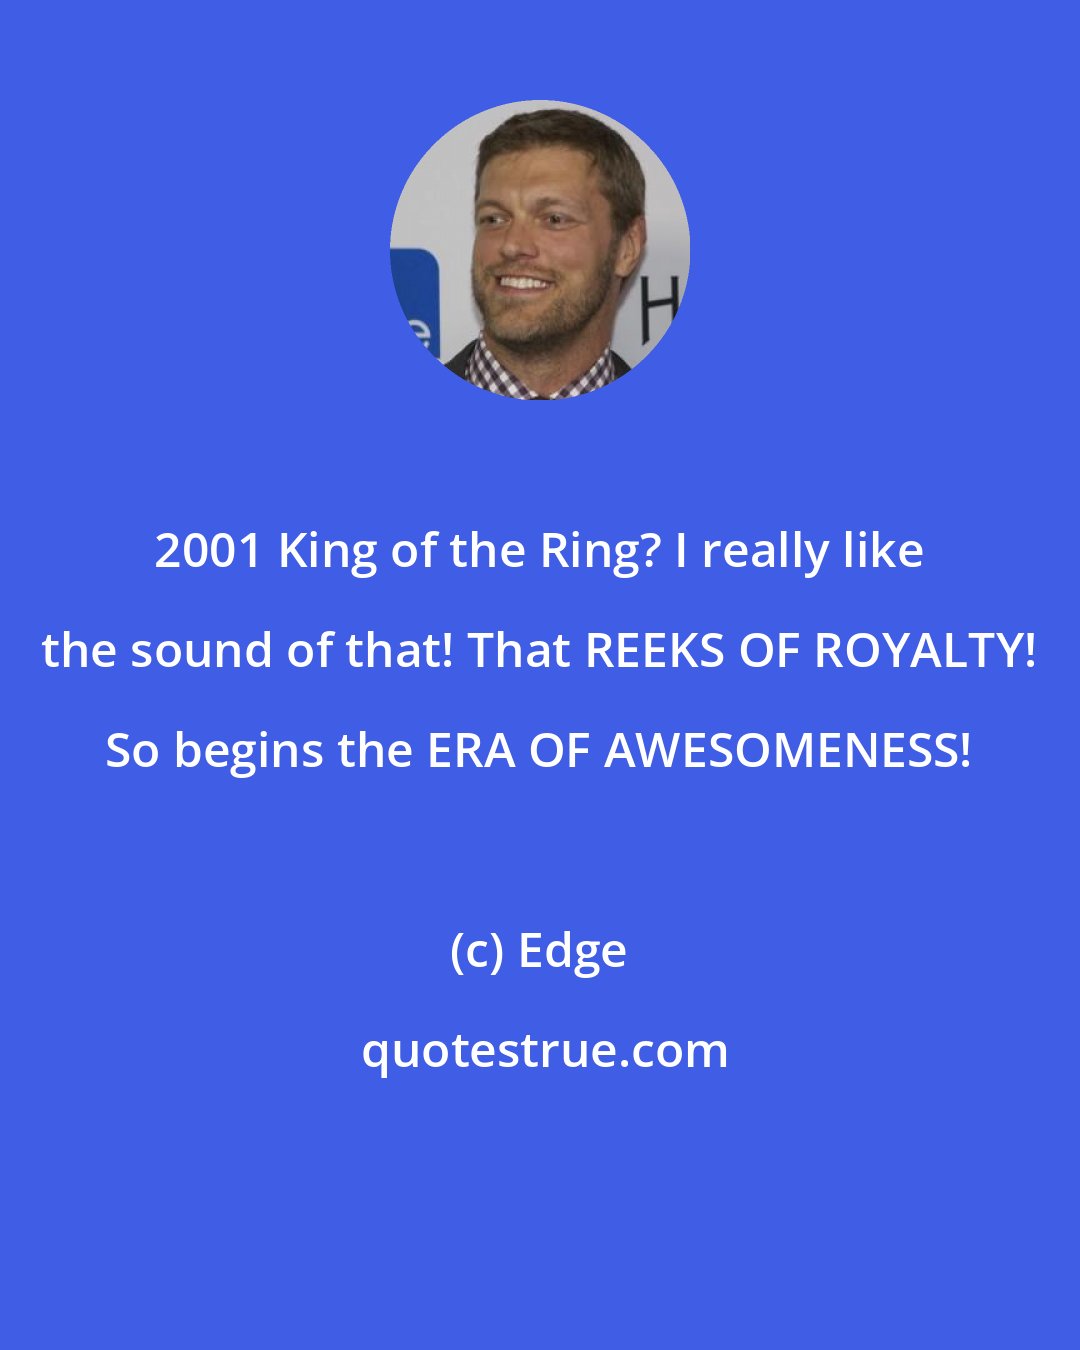 Edge: 2001 King of the Ring? I really like the sound of that! That REEKS OF ROYALTY! So begins the ERA OF AWESOMENESS!